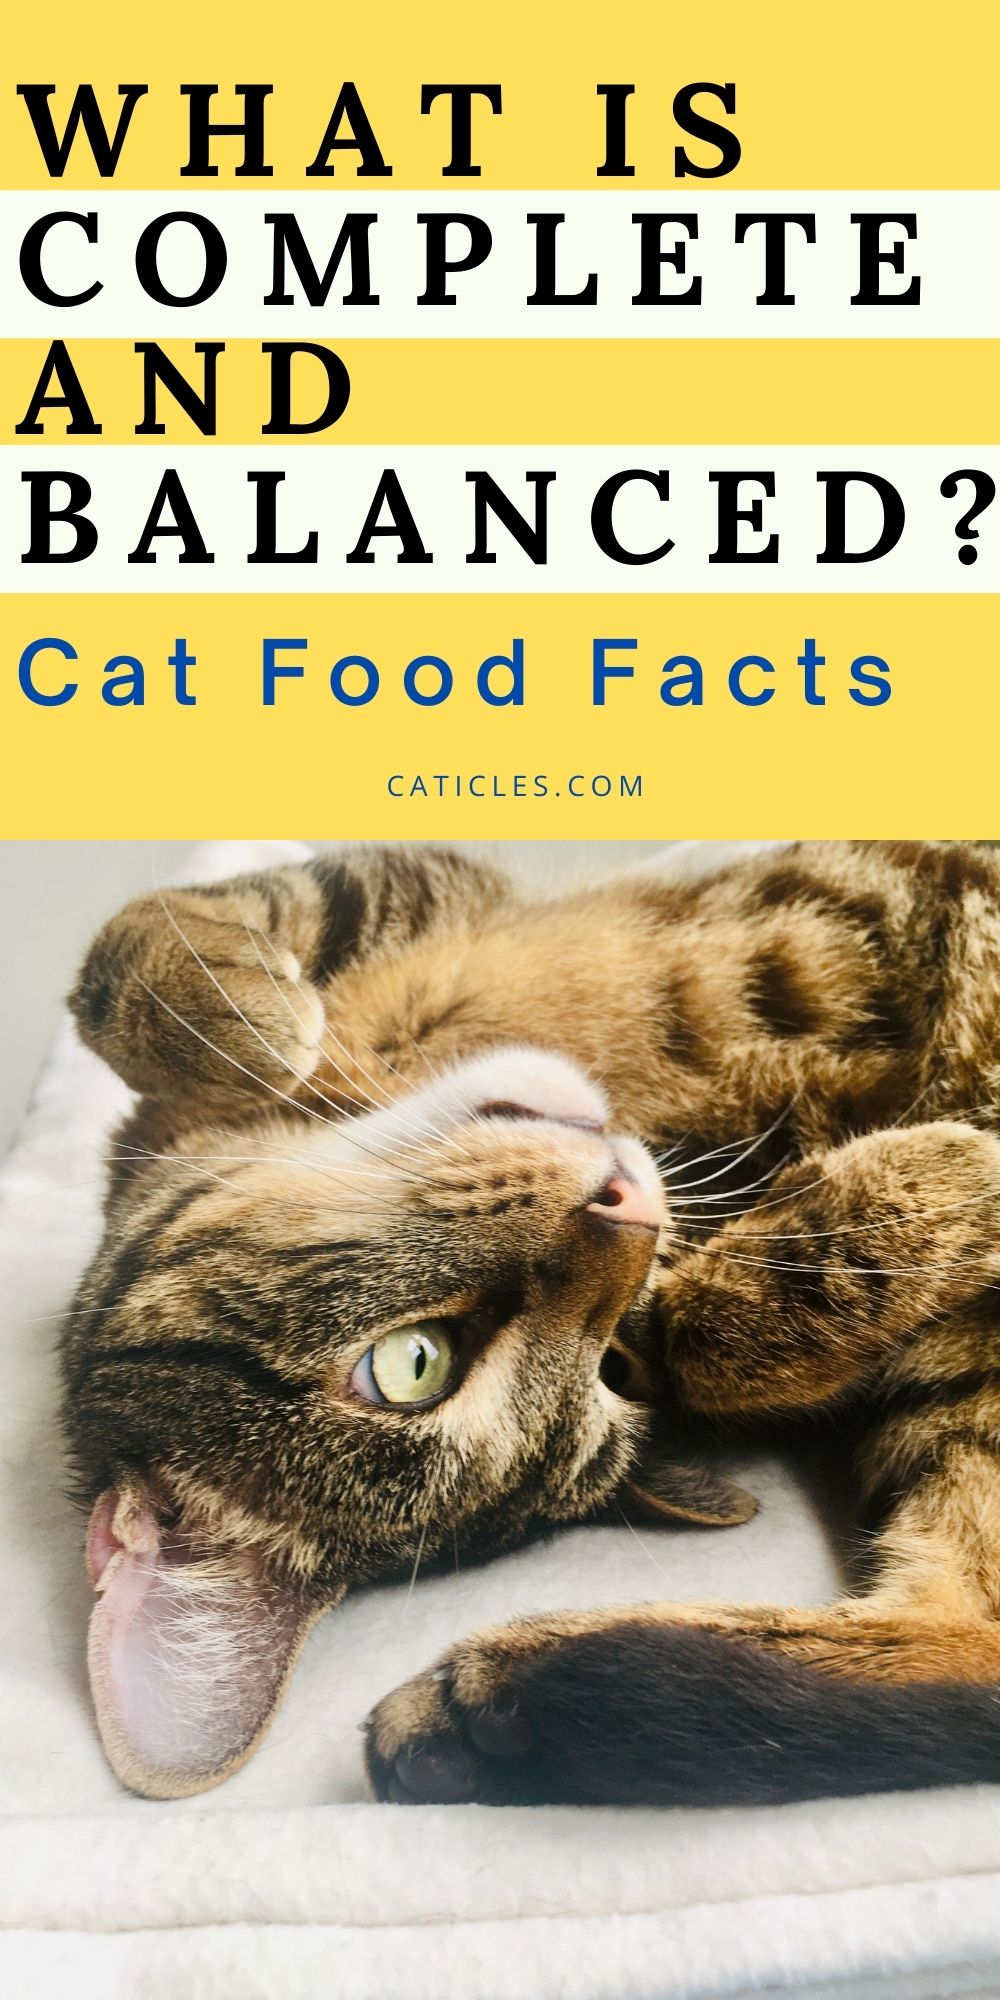 complete and balanced cat food facts pin image